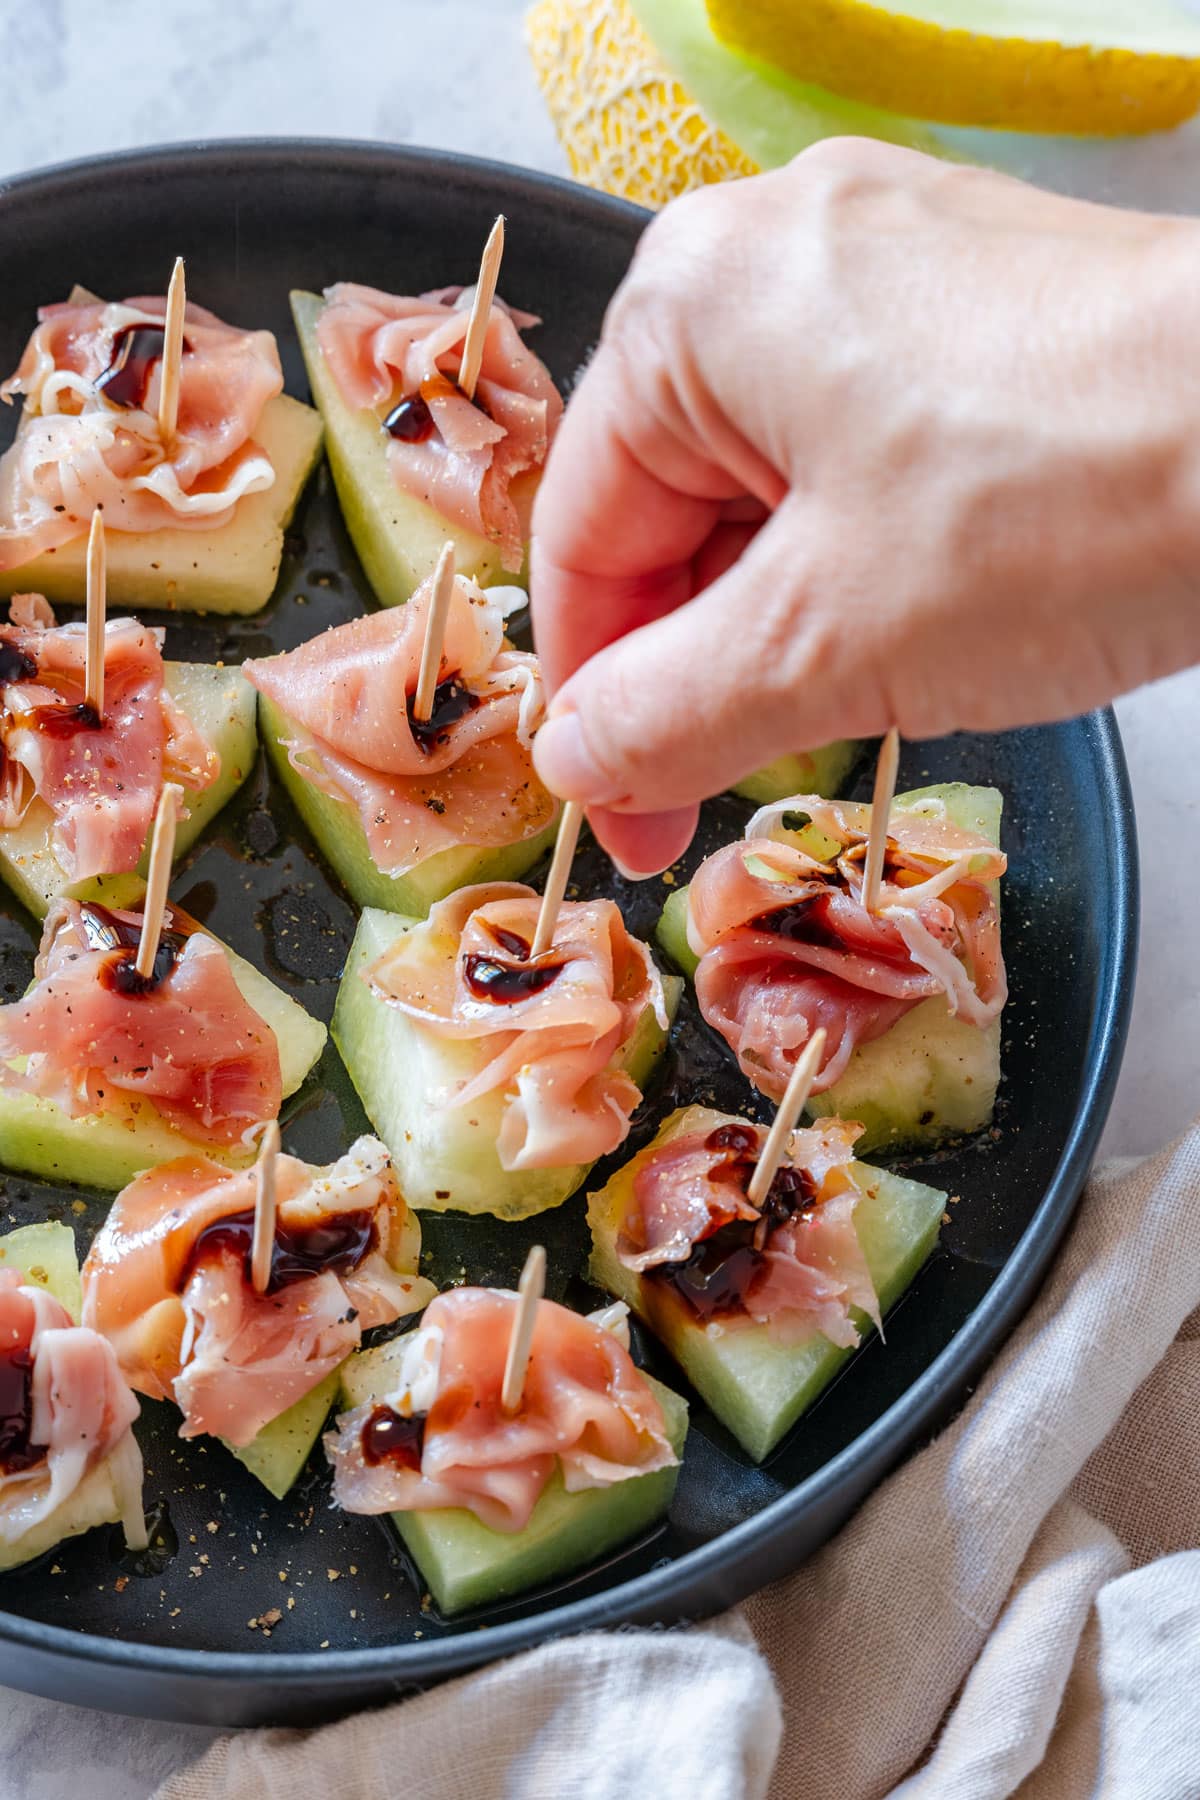 A hand reaching for a melon with prosciutto, topped with a drizzle of balsamic glaze.